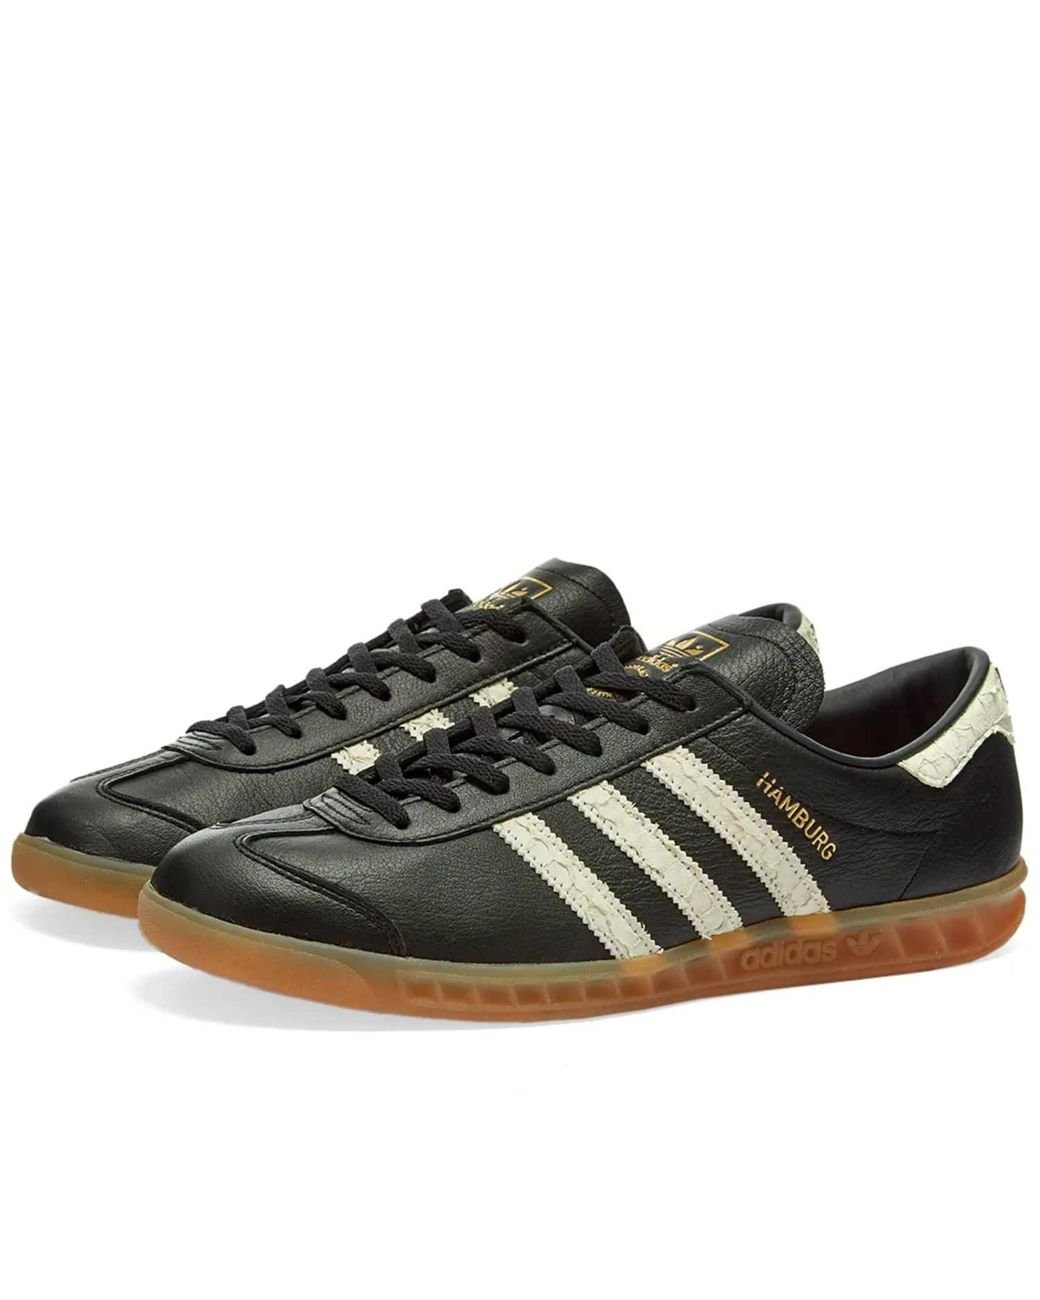 adidas Leather Hamburg Trainers in Black for Men - Save 64% - Lyst